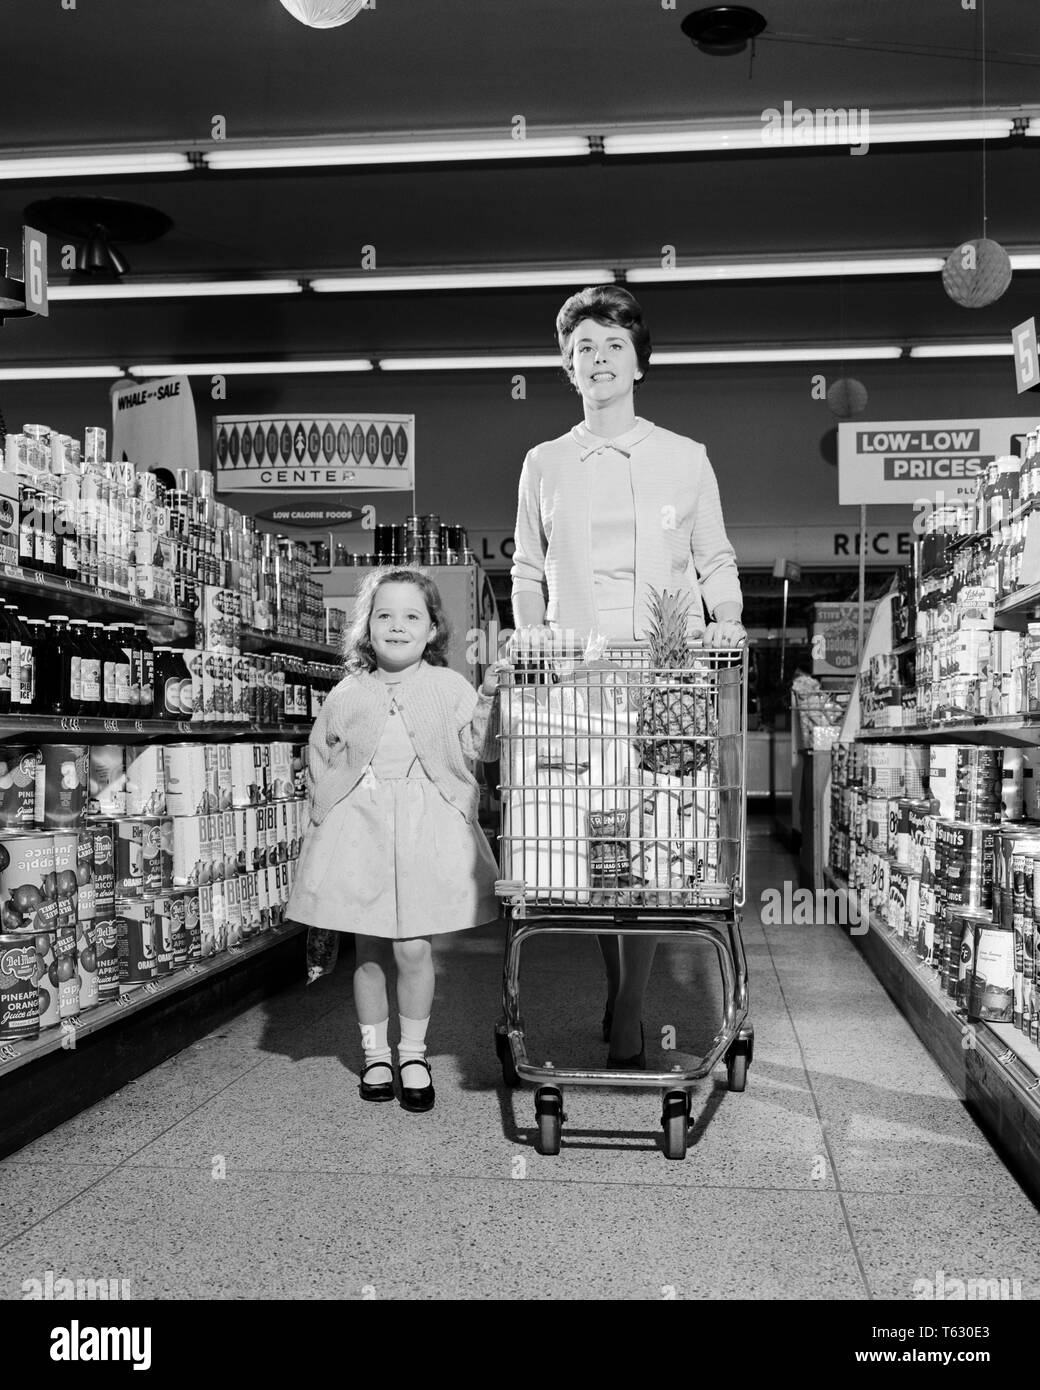 1950s 1960s SMILING MOTHER AND DAUGHTER WALKING DOWN CANNED FOOD AISLE OF SUPERMARKET PUSHING SHOPPING CART - s13082 HAR001 HARS CART GROCERIES MOTHERS OLD TIME BUSY NOSTALGIA OLD FASHION 1 JUVENILE STYLE YOUNG ADULT TEAMWORK PLEASED JOY LIFESTYLE SATISFACTION FEMALES AISLE HEALTHINESS HOME LIFE COPY SPACE FRIENDSHIP FULL-LENGTH LADIES DAUGHTERS PERSONS CONFIDENCE B&W CANNED SHOPPER SHOPPERS HAPPINESS CHEERFUL AND CHOICE KART MARY JANE PRIDE SMILES CONNECTION JOYFUL STYLISH COOPERATION JUVENILES MOMS TOGETHERNESS YOUNG ADULT WOMAN BLACK AND WHITE CAUCASIAN ETHNICITY HAR001 OLD FASHIONED Stock Photo